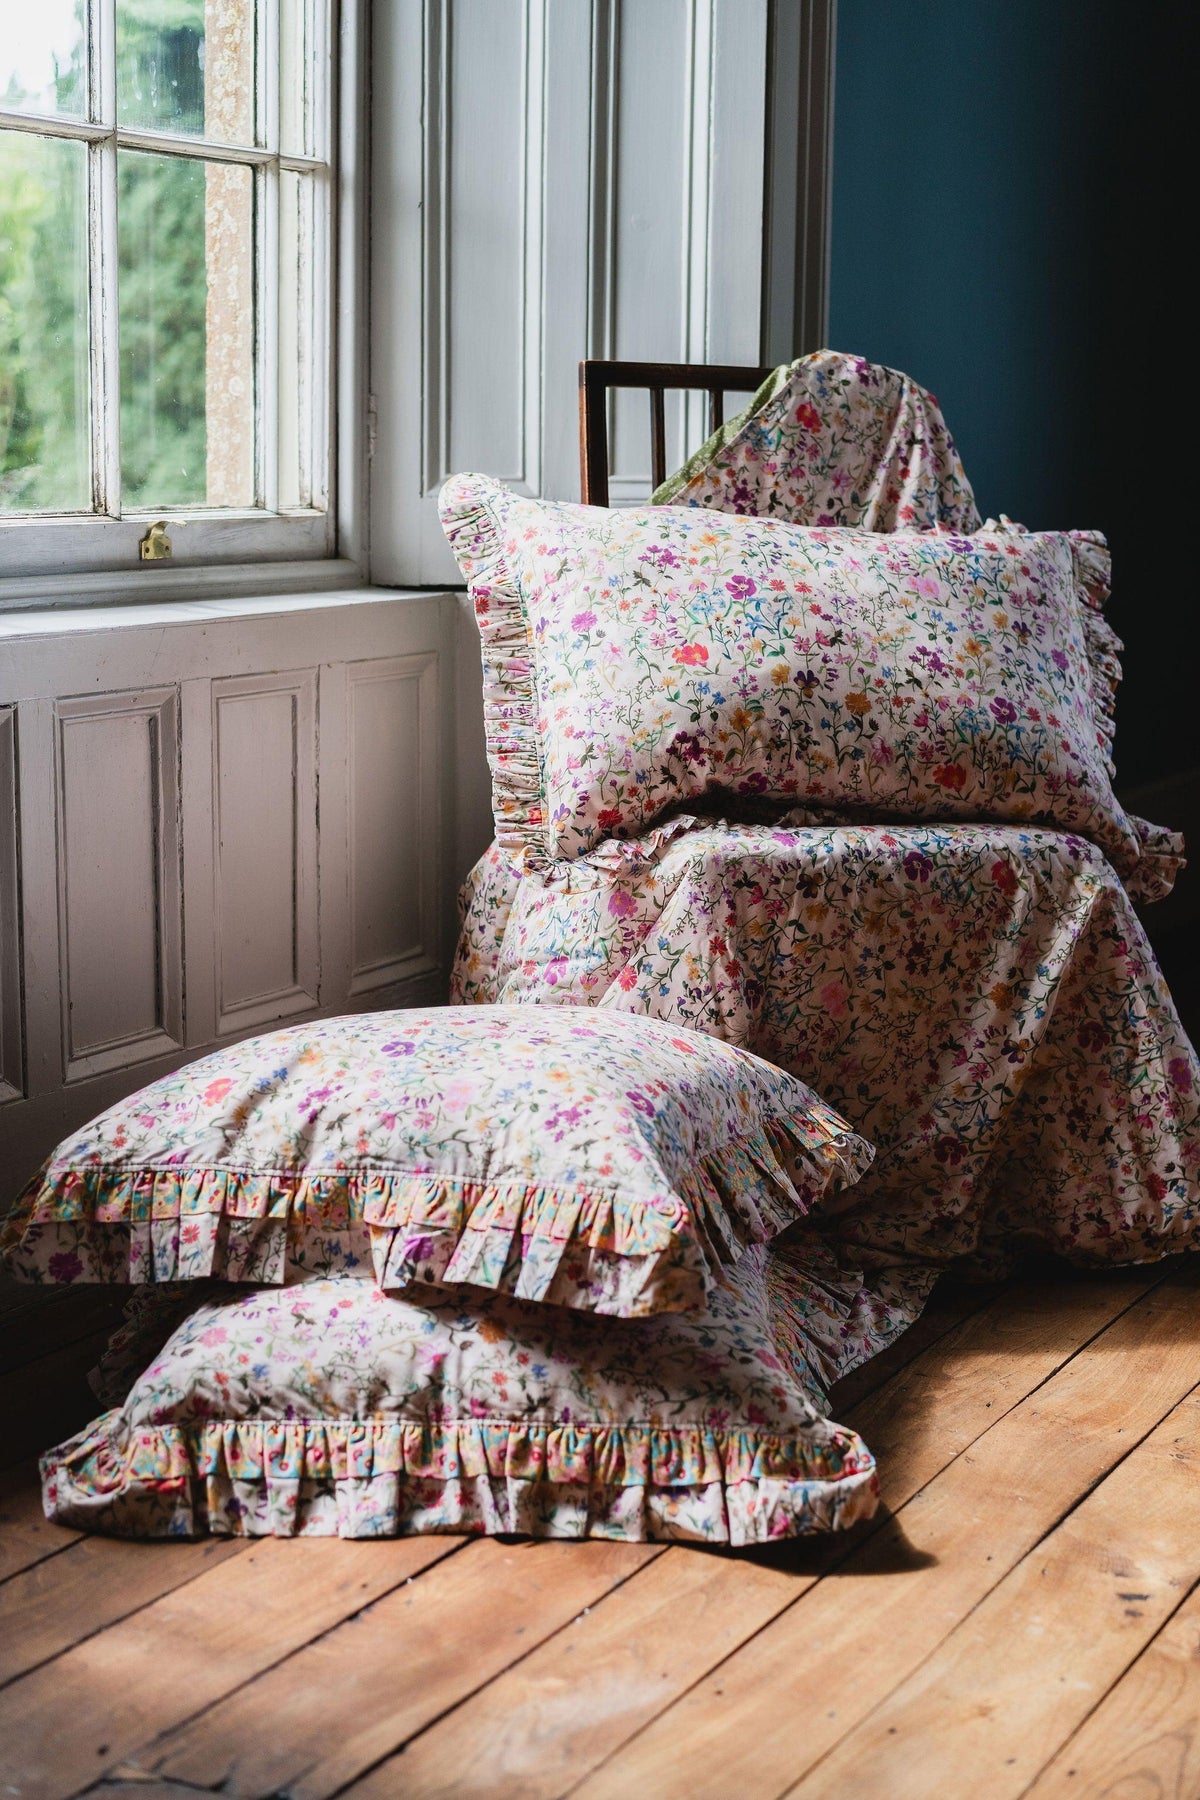 Oblong Ruffle Cushion made with Liberty Fabric LINEN GARDEN - Coco & Wolf